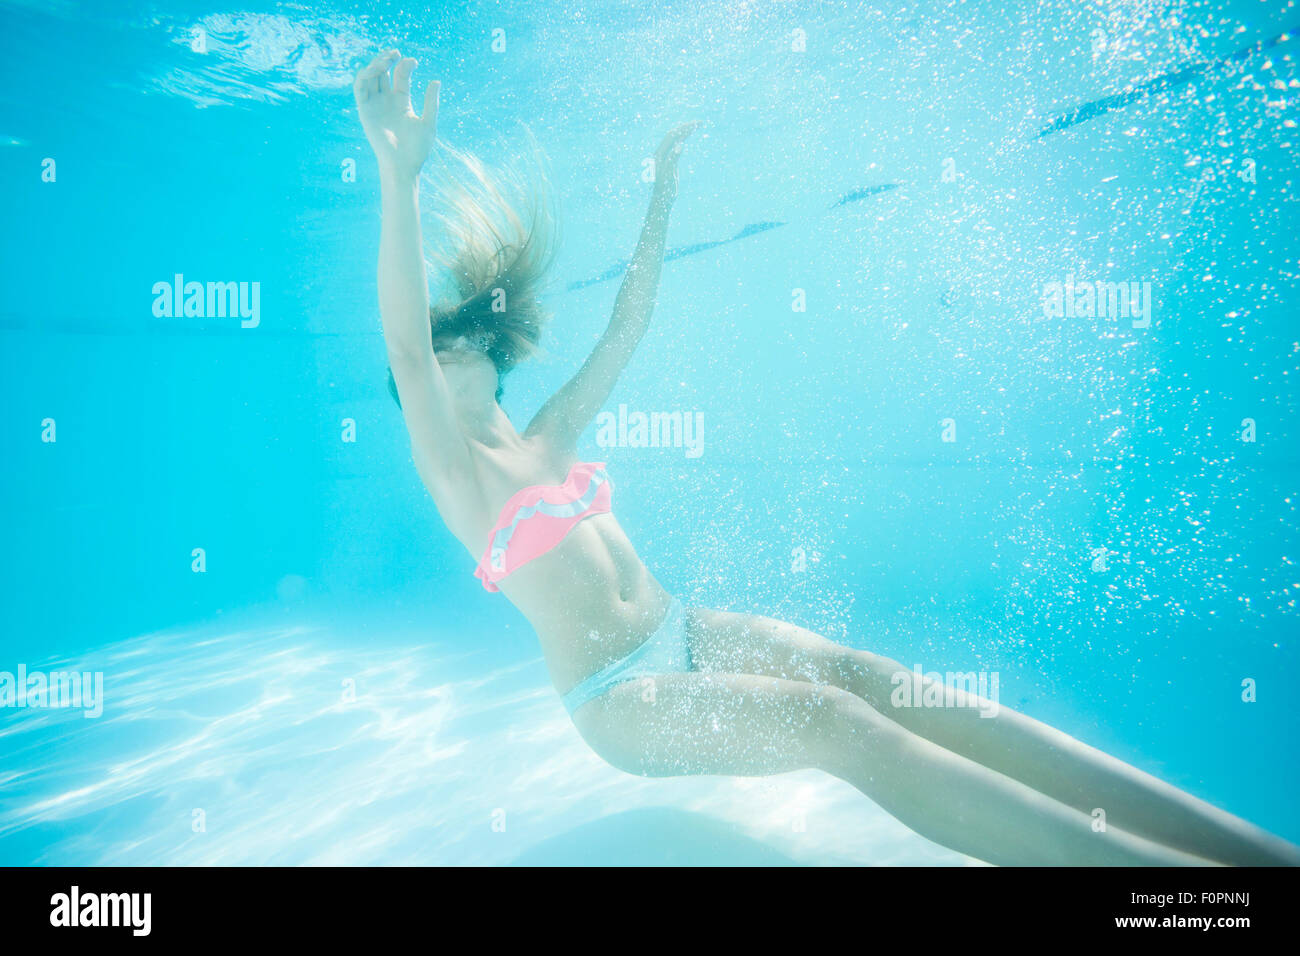 Young woman underwater in swimming pool. Danger of accidental Stock Photo